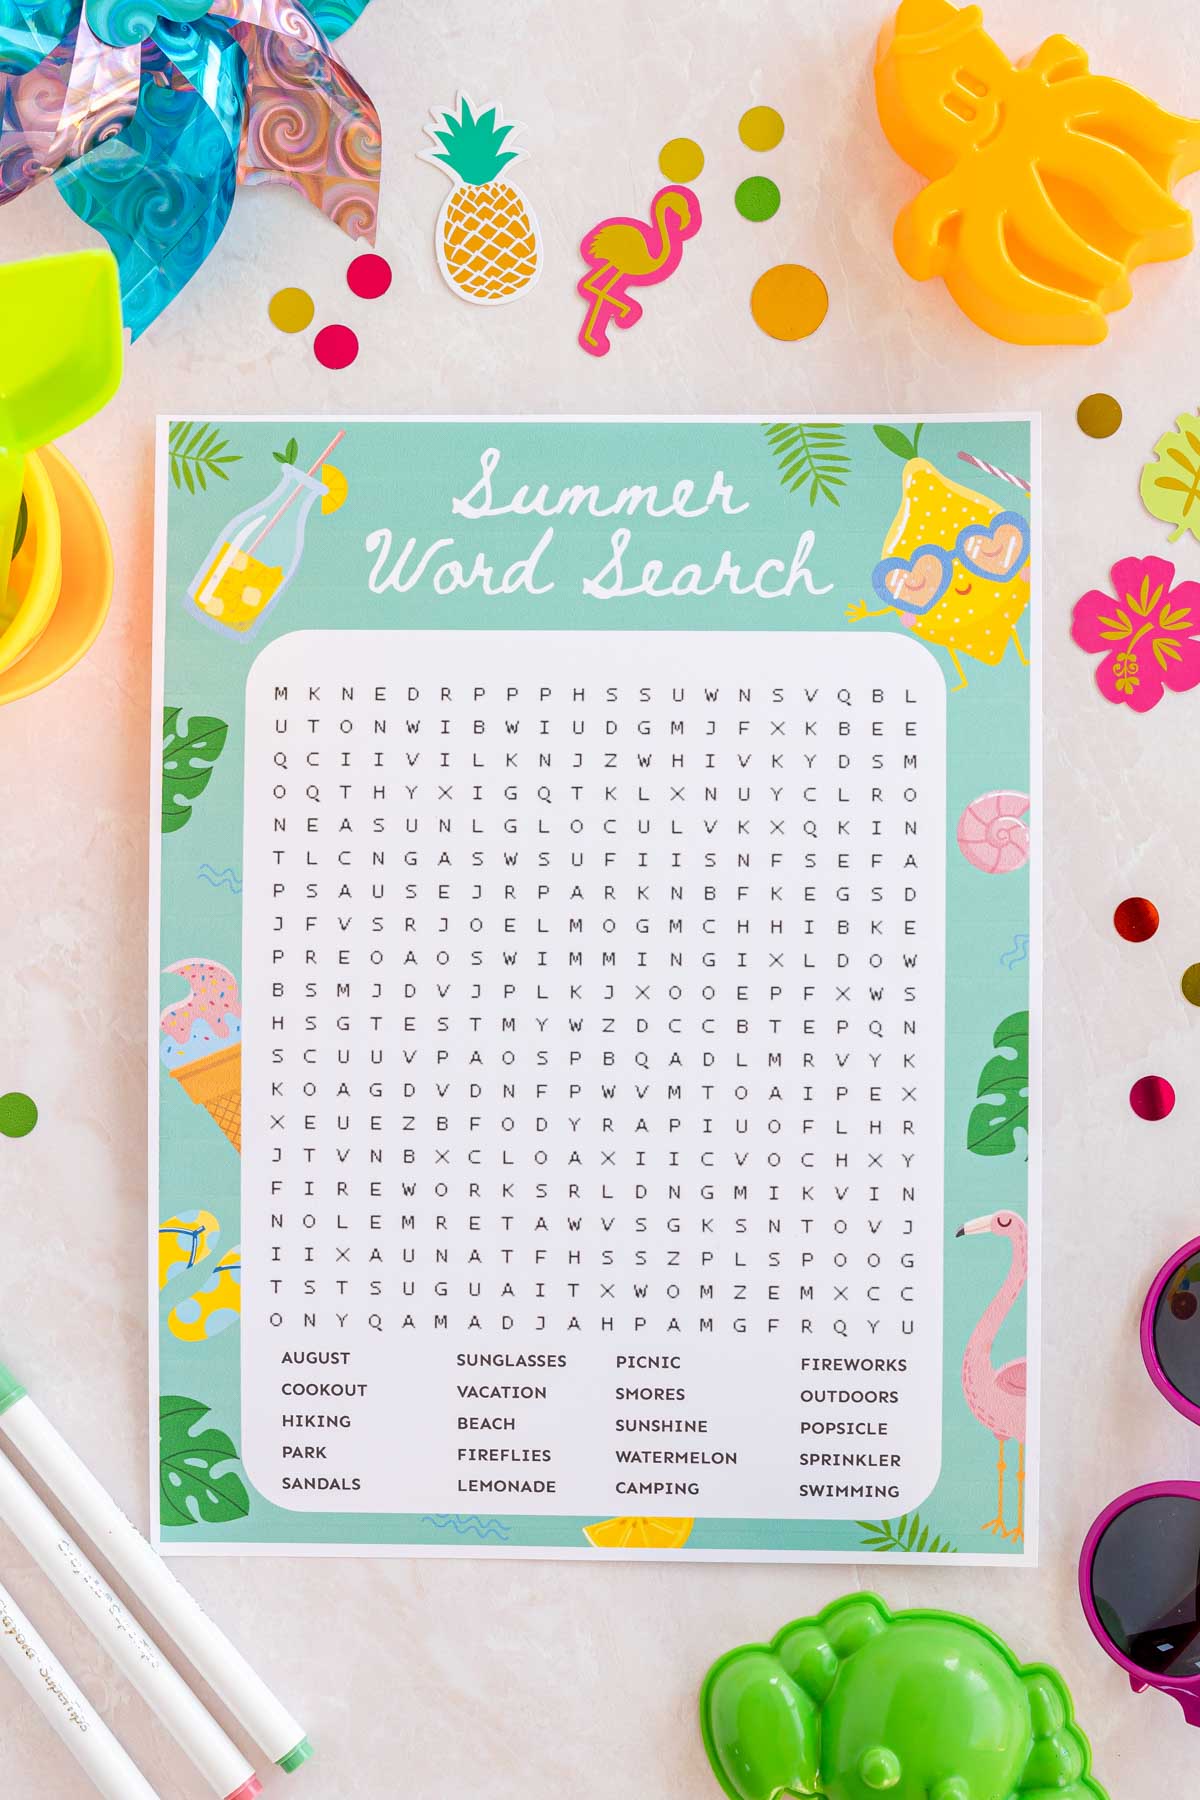 summer word search with summer items around